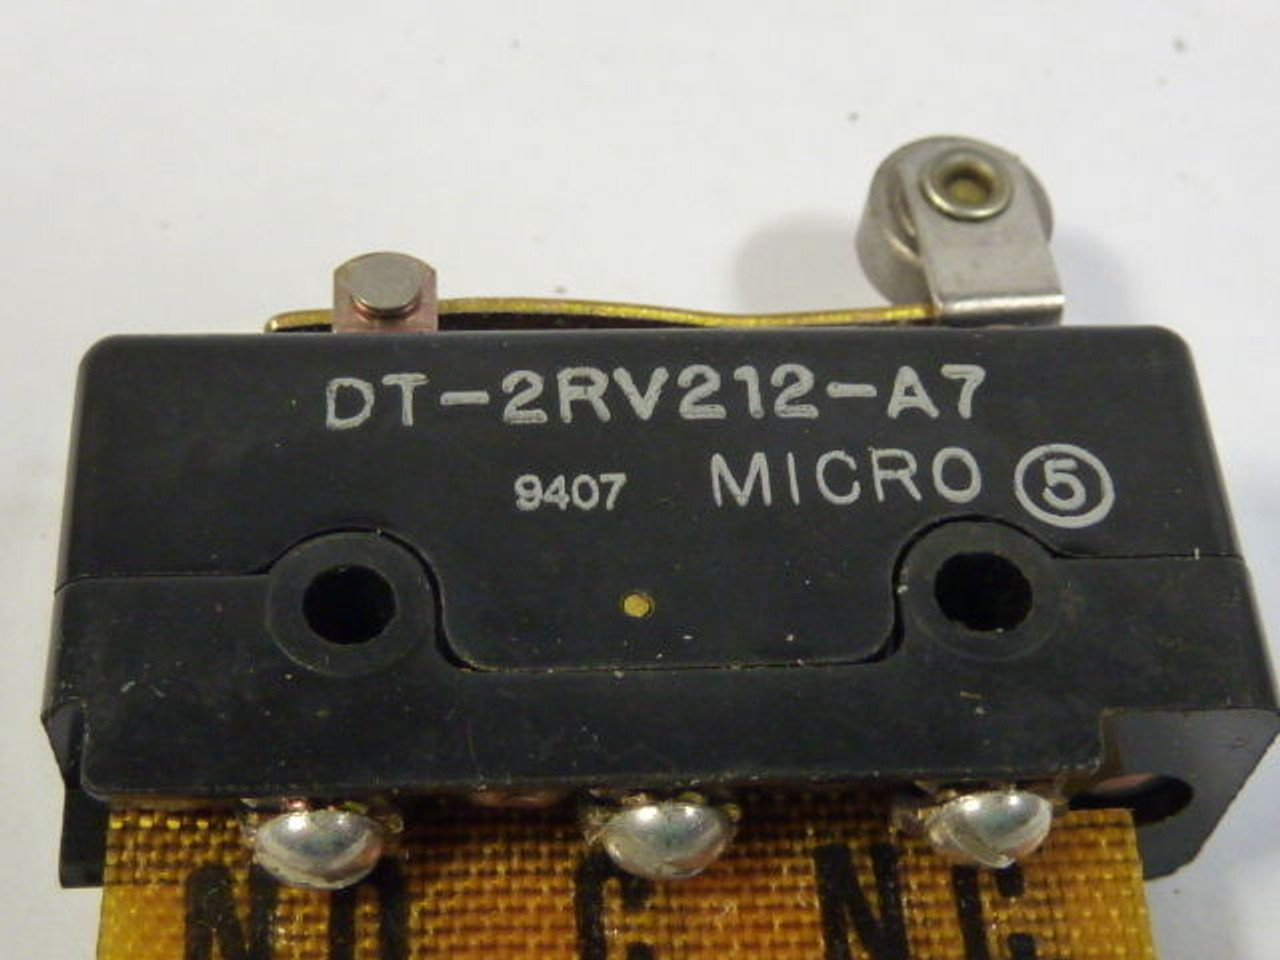 Microswitch DT-2RV212-A2 Snap Action Basic Switch USED